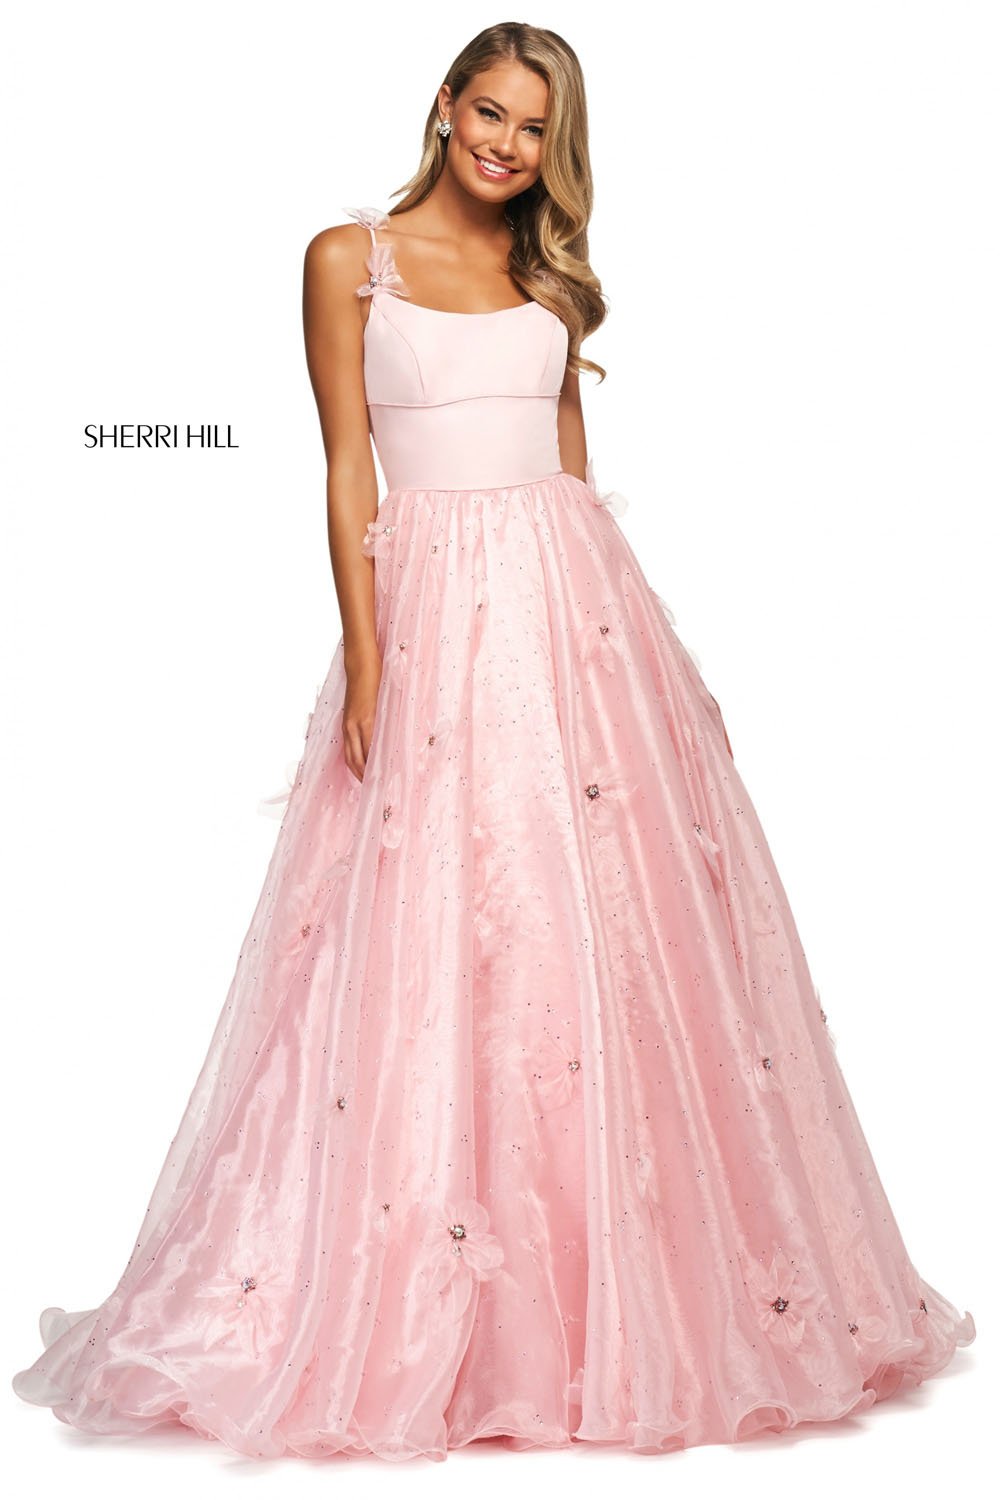 Sherri Hill 53823 dress images in these colors: Ivory, Blush, Light Blue, Lilac, Candy Pink, Yellow, Aqua.